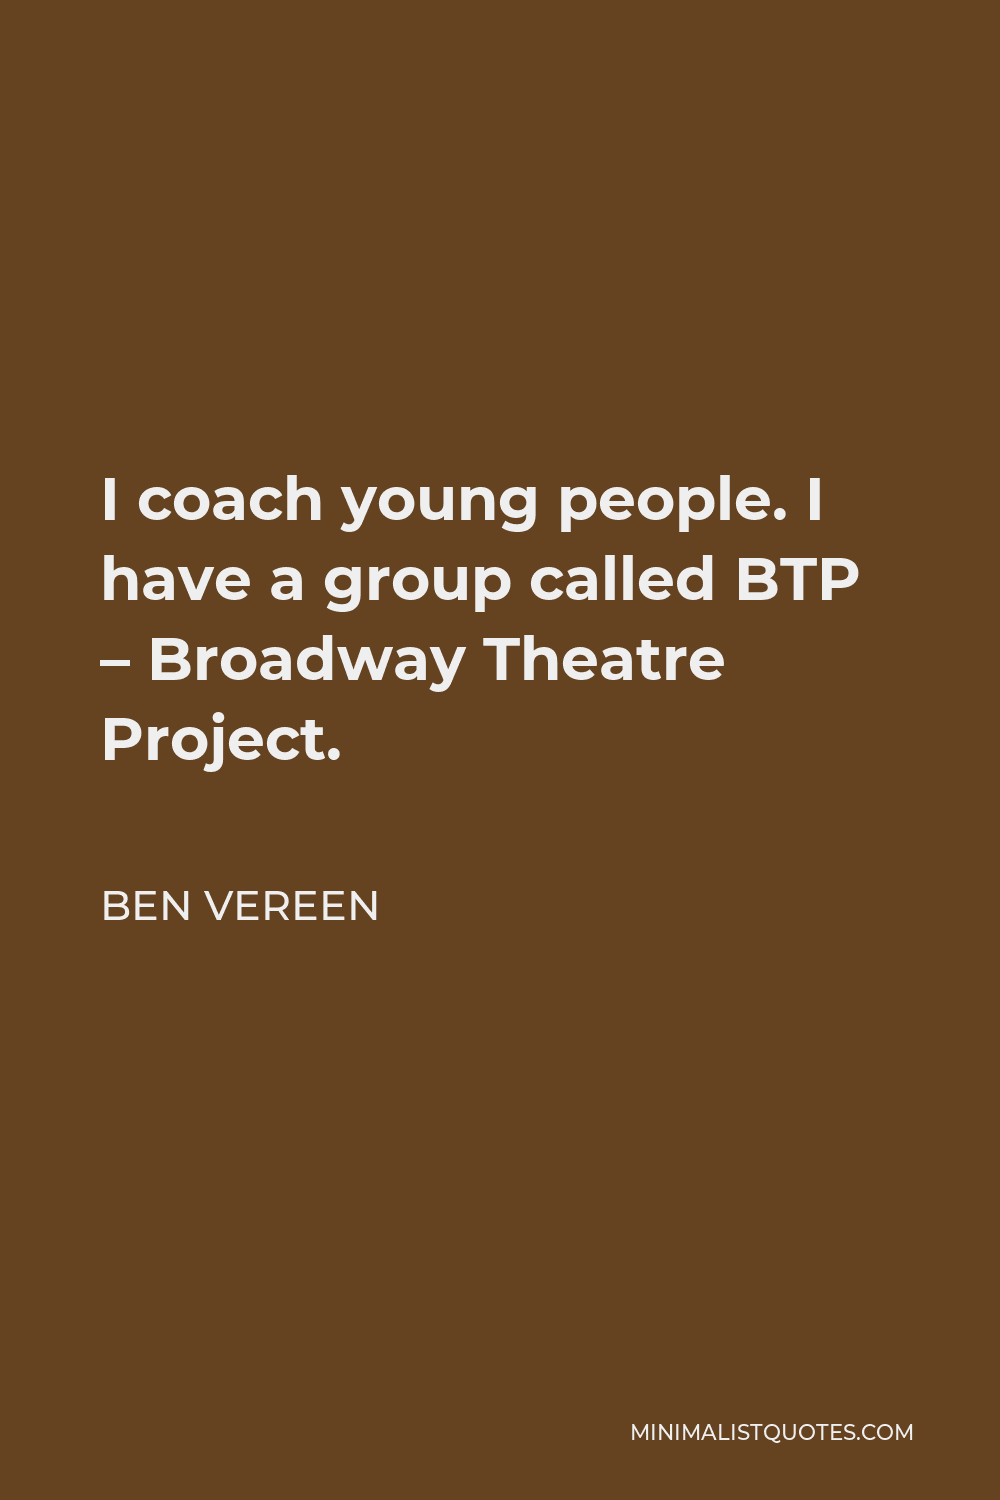 Ben Vereen Quote - I coach young people. I have a group called BTP – Broadway Theatre Project.